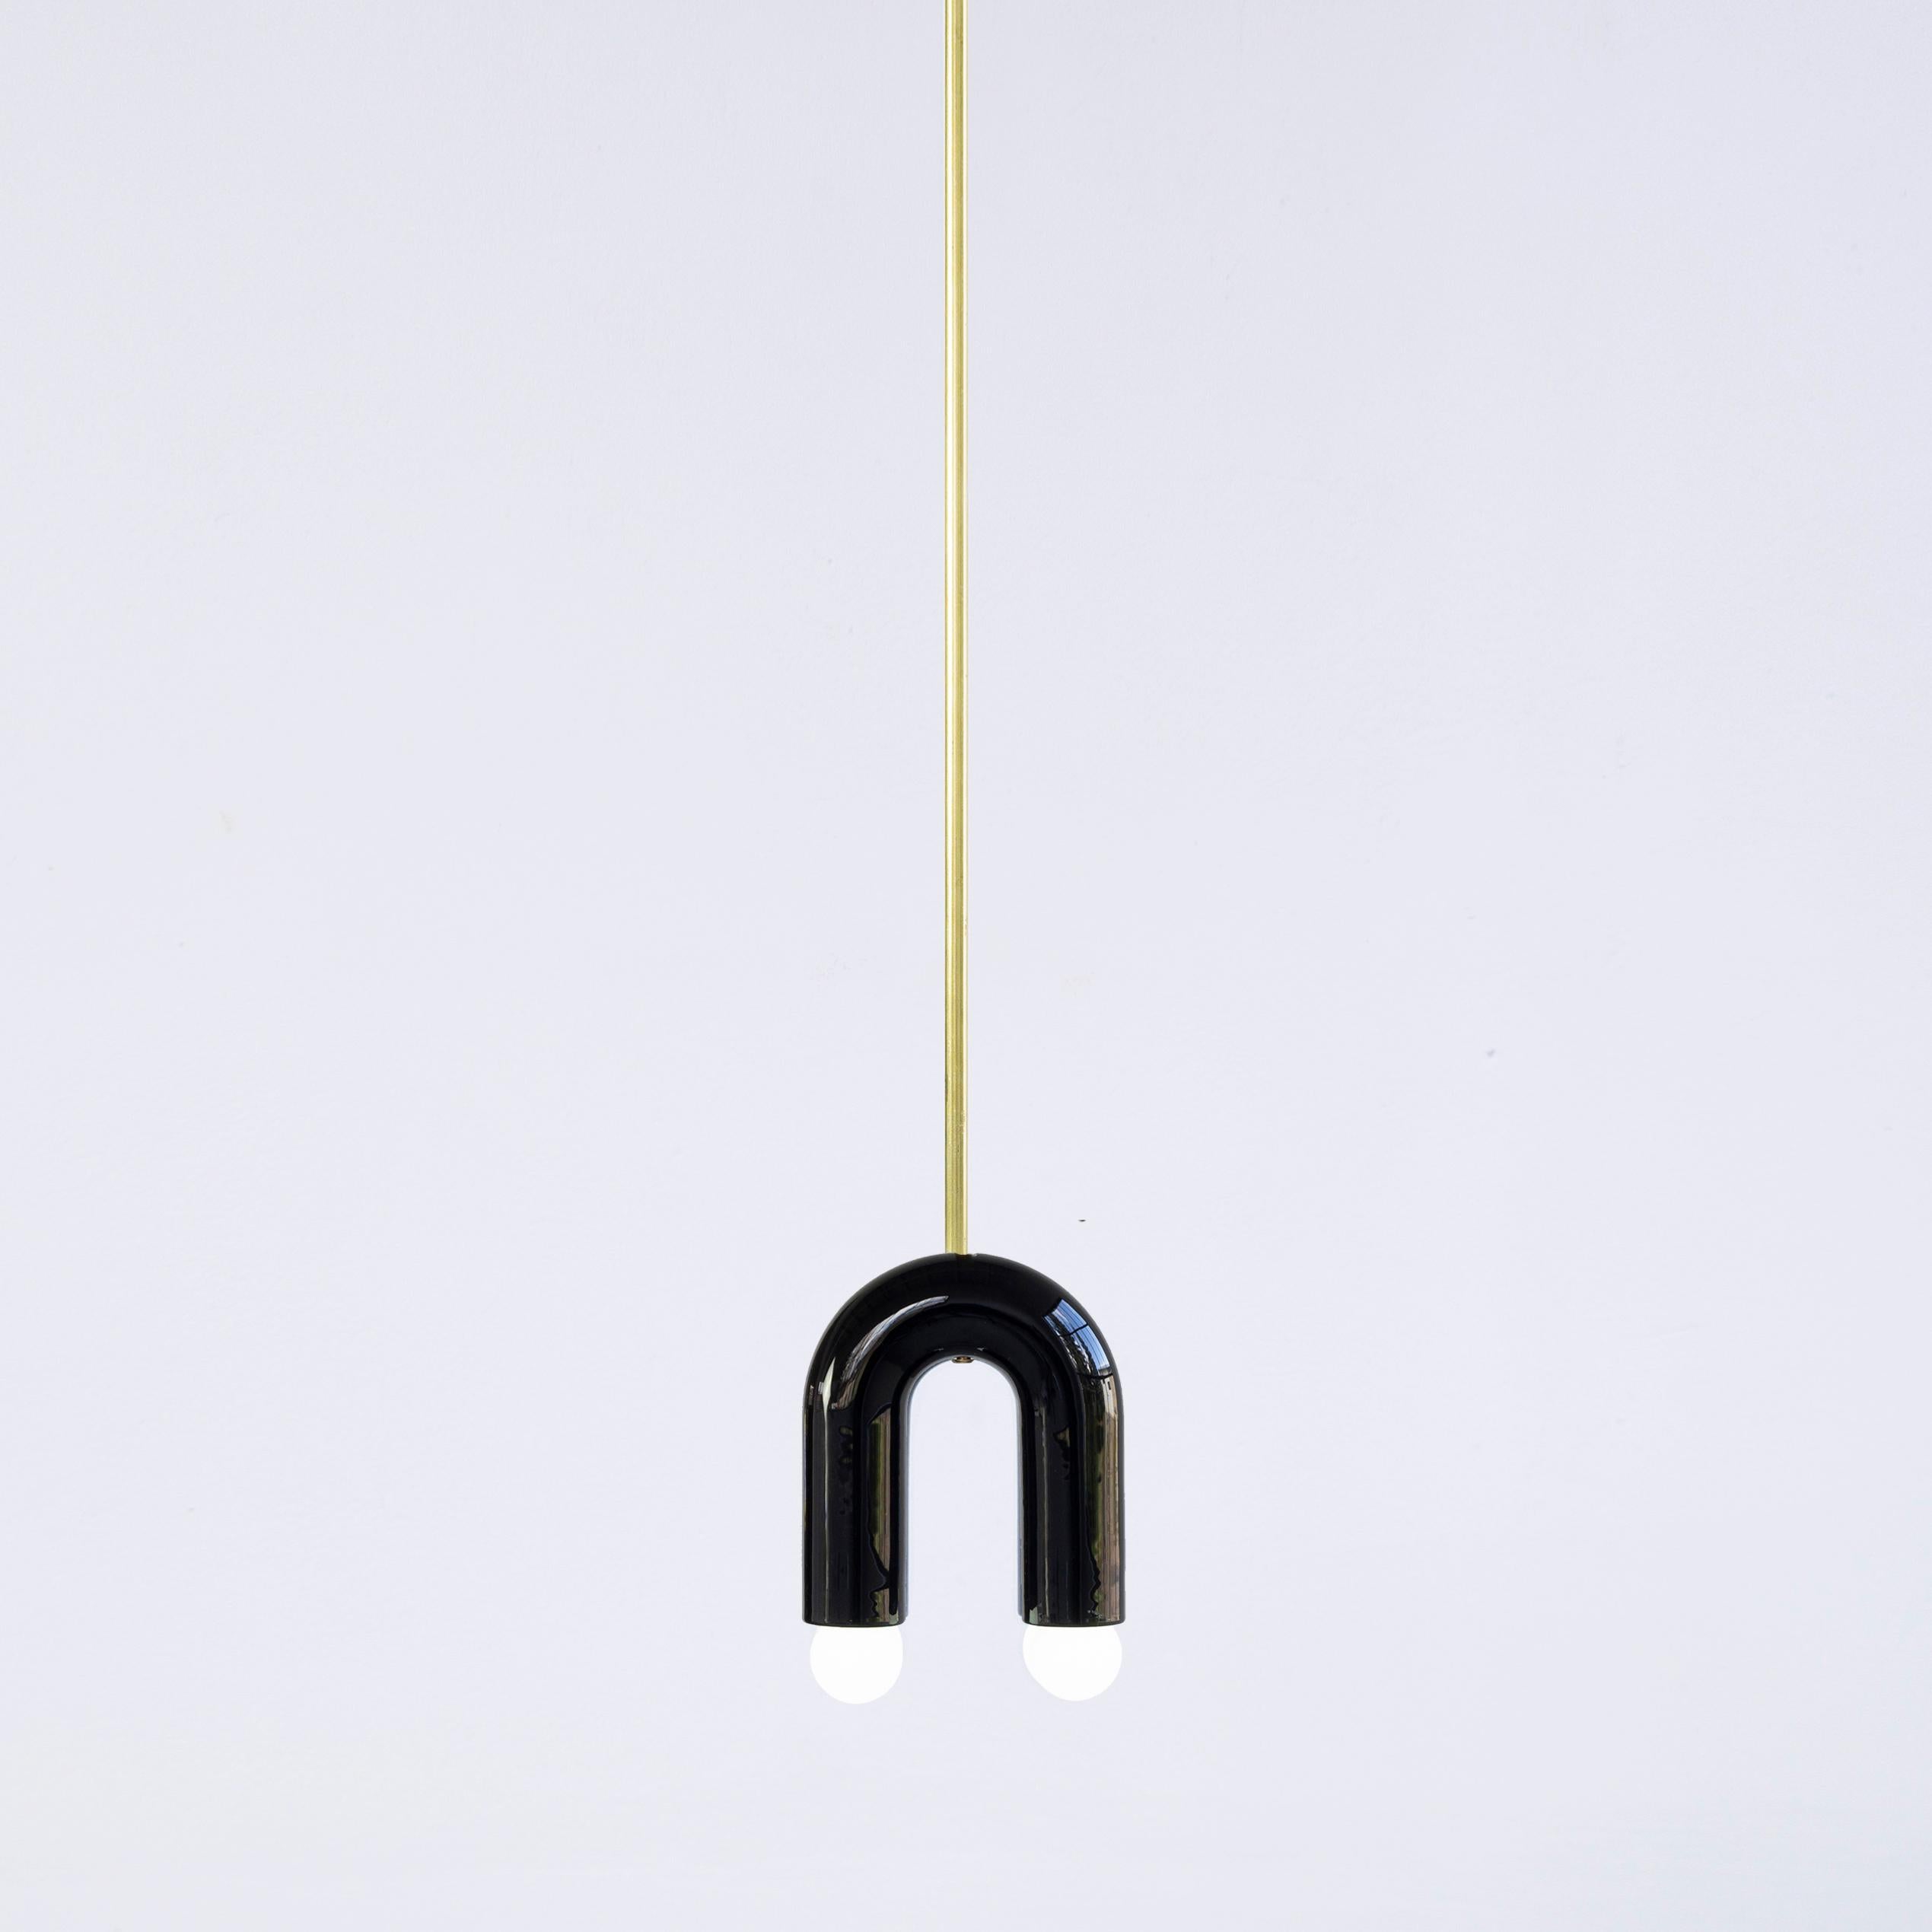 The lighting fixture is part of TRN collection. Three dimensional objects inspired by Jan Tarasin painting have a simple calligraphic form so they can play and talk together as if they were letters from a non-existent alphabet.
 
The hand crafted